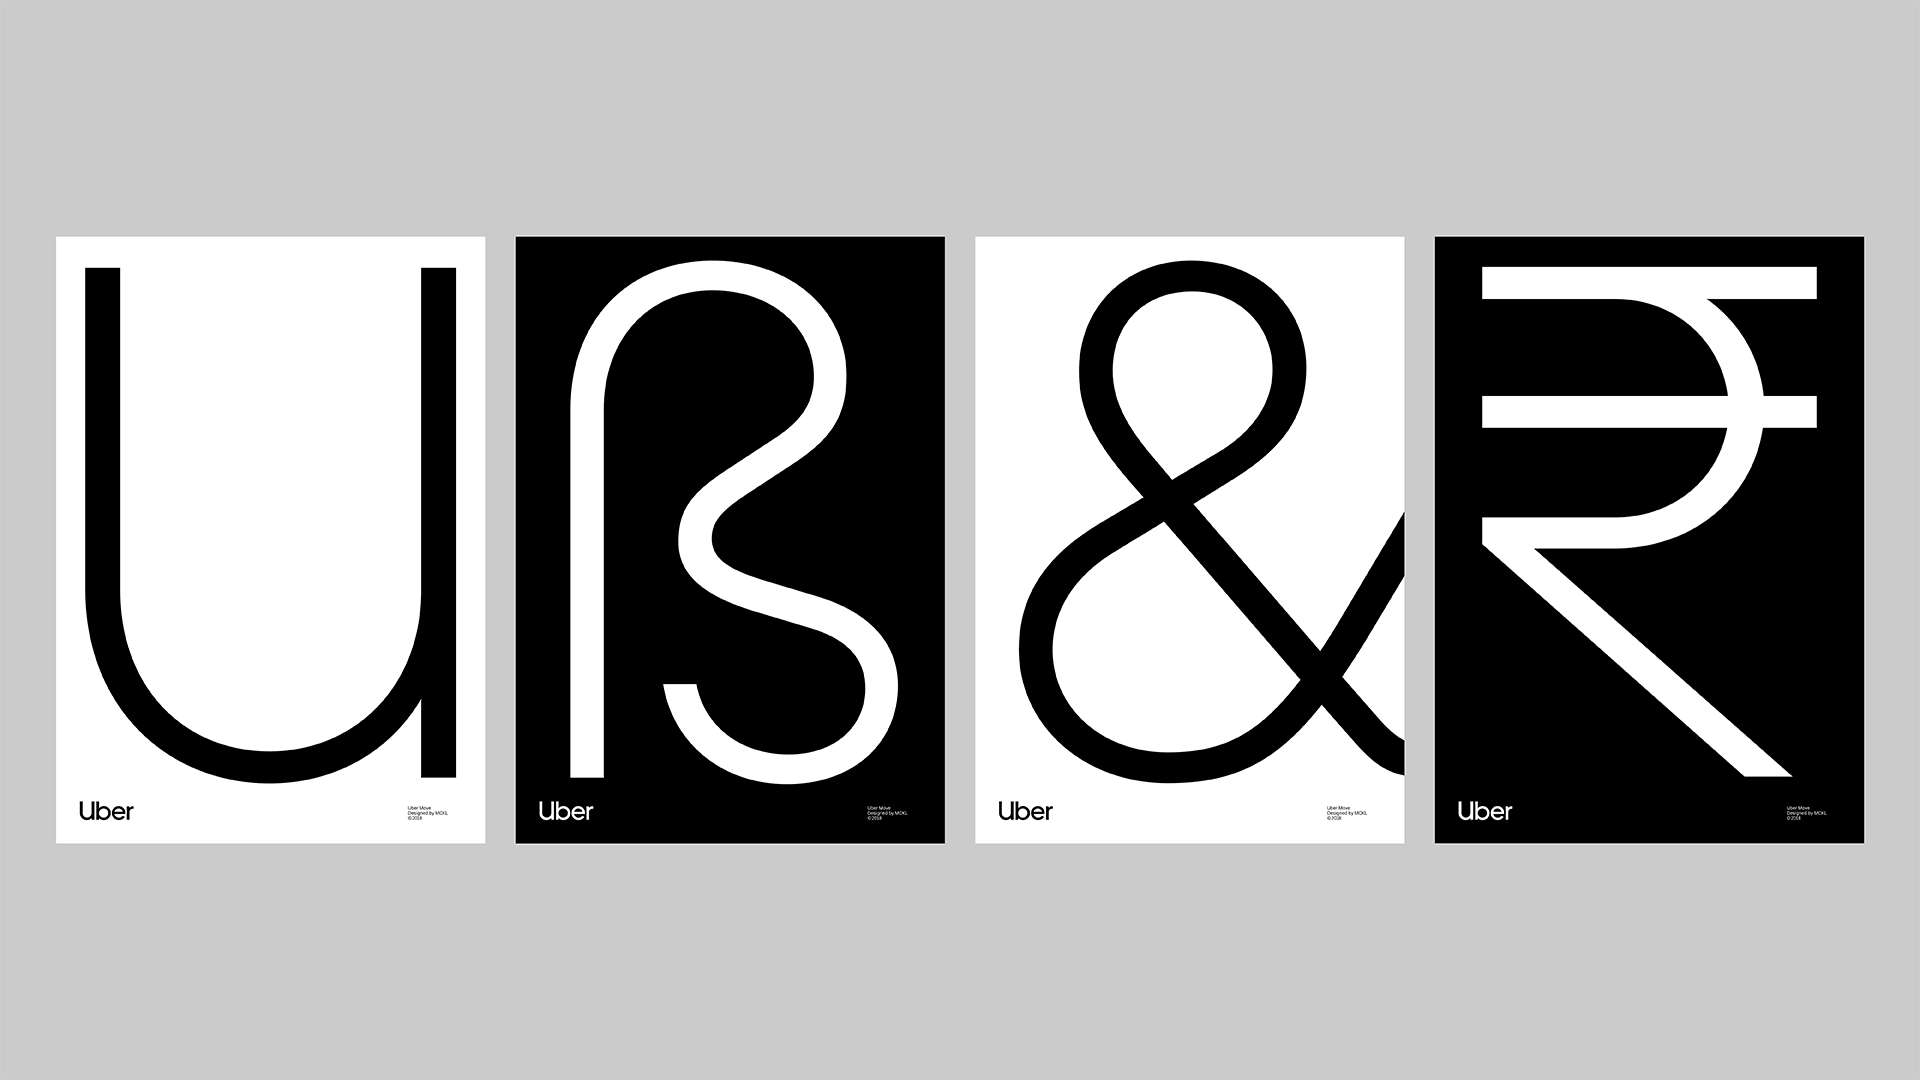 Uber Logo - Brand New: New Logo and Identity for Uber by Wolff Olins and In-house